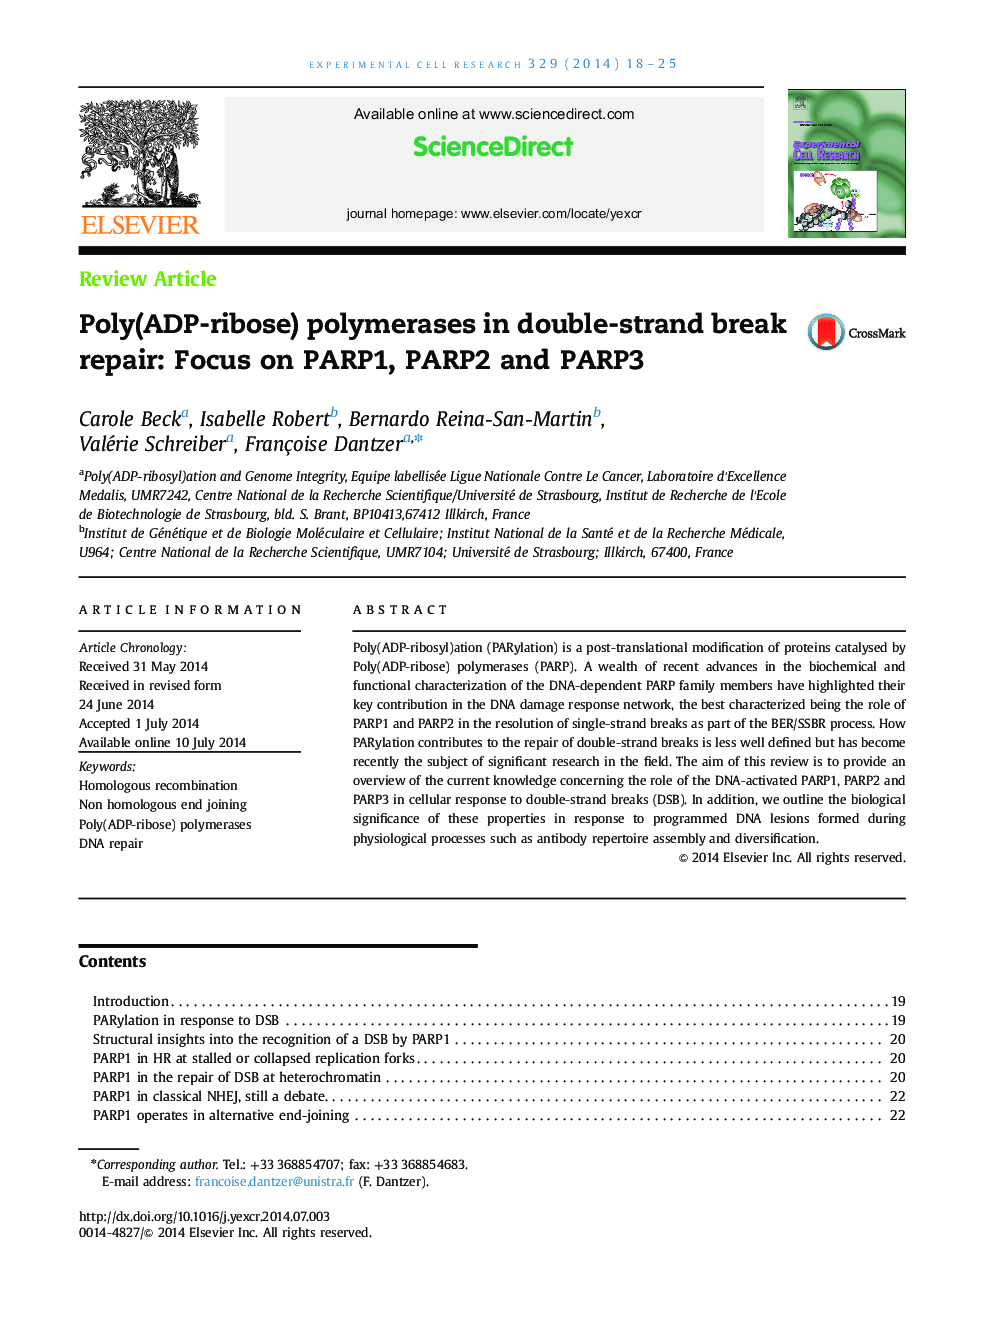 Poly(ADP-ribose) polymerases in double-strand break repair: Focus on PARP1, PARP2 and PARP3